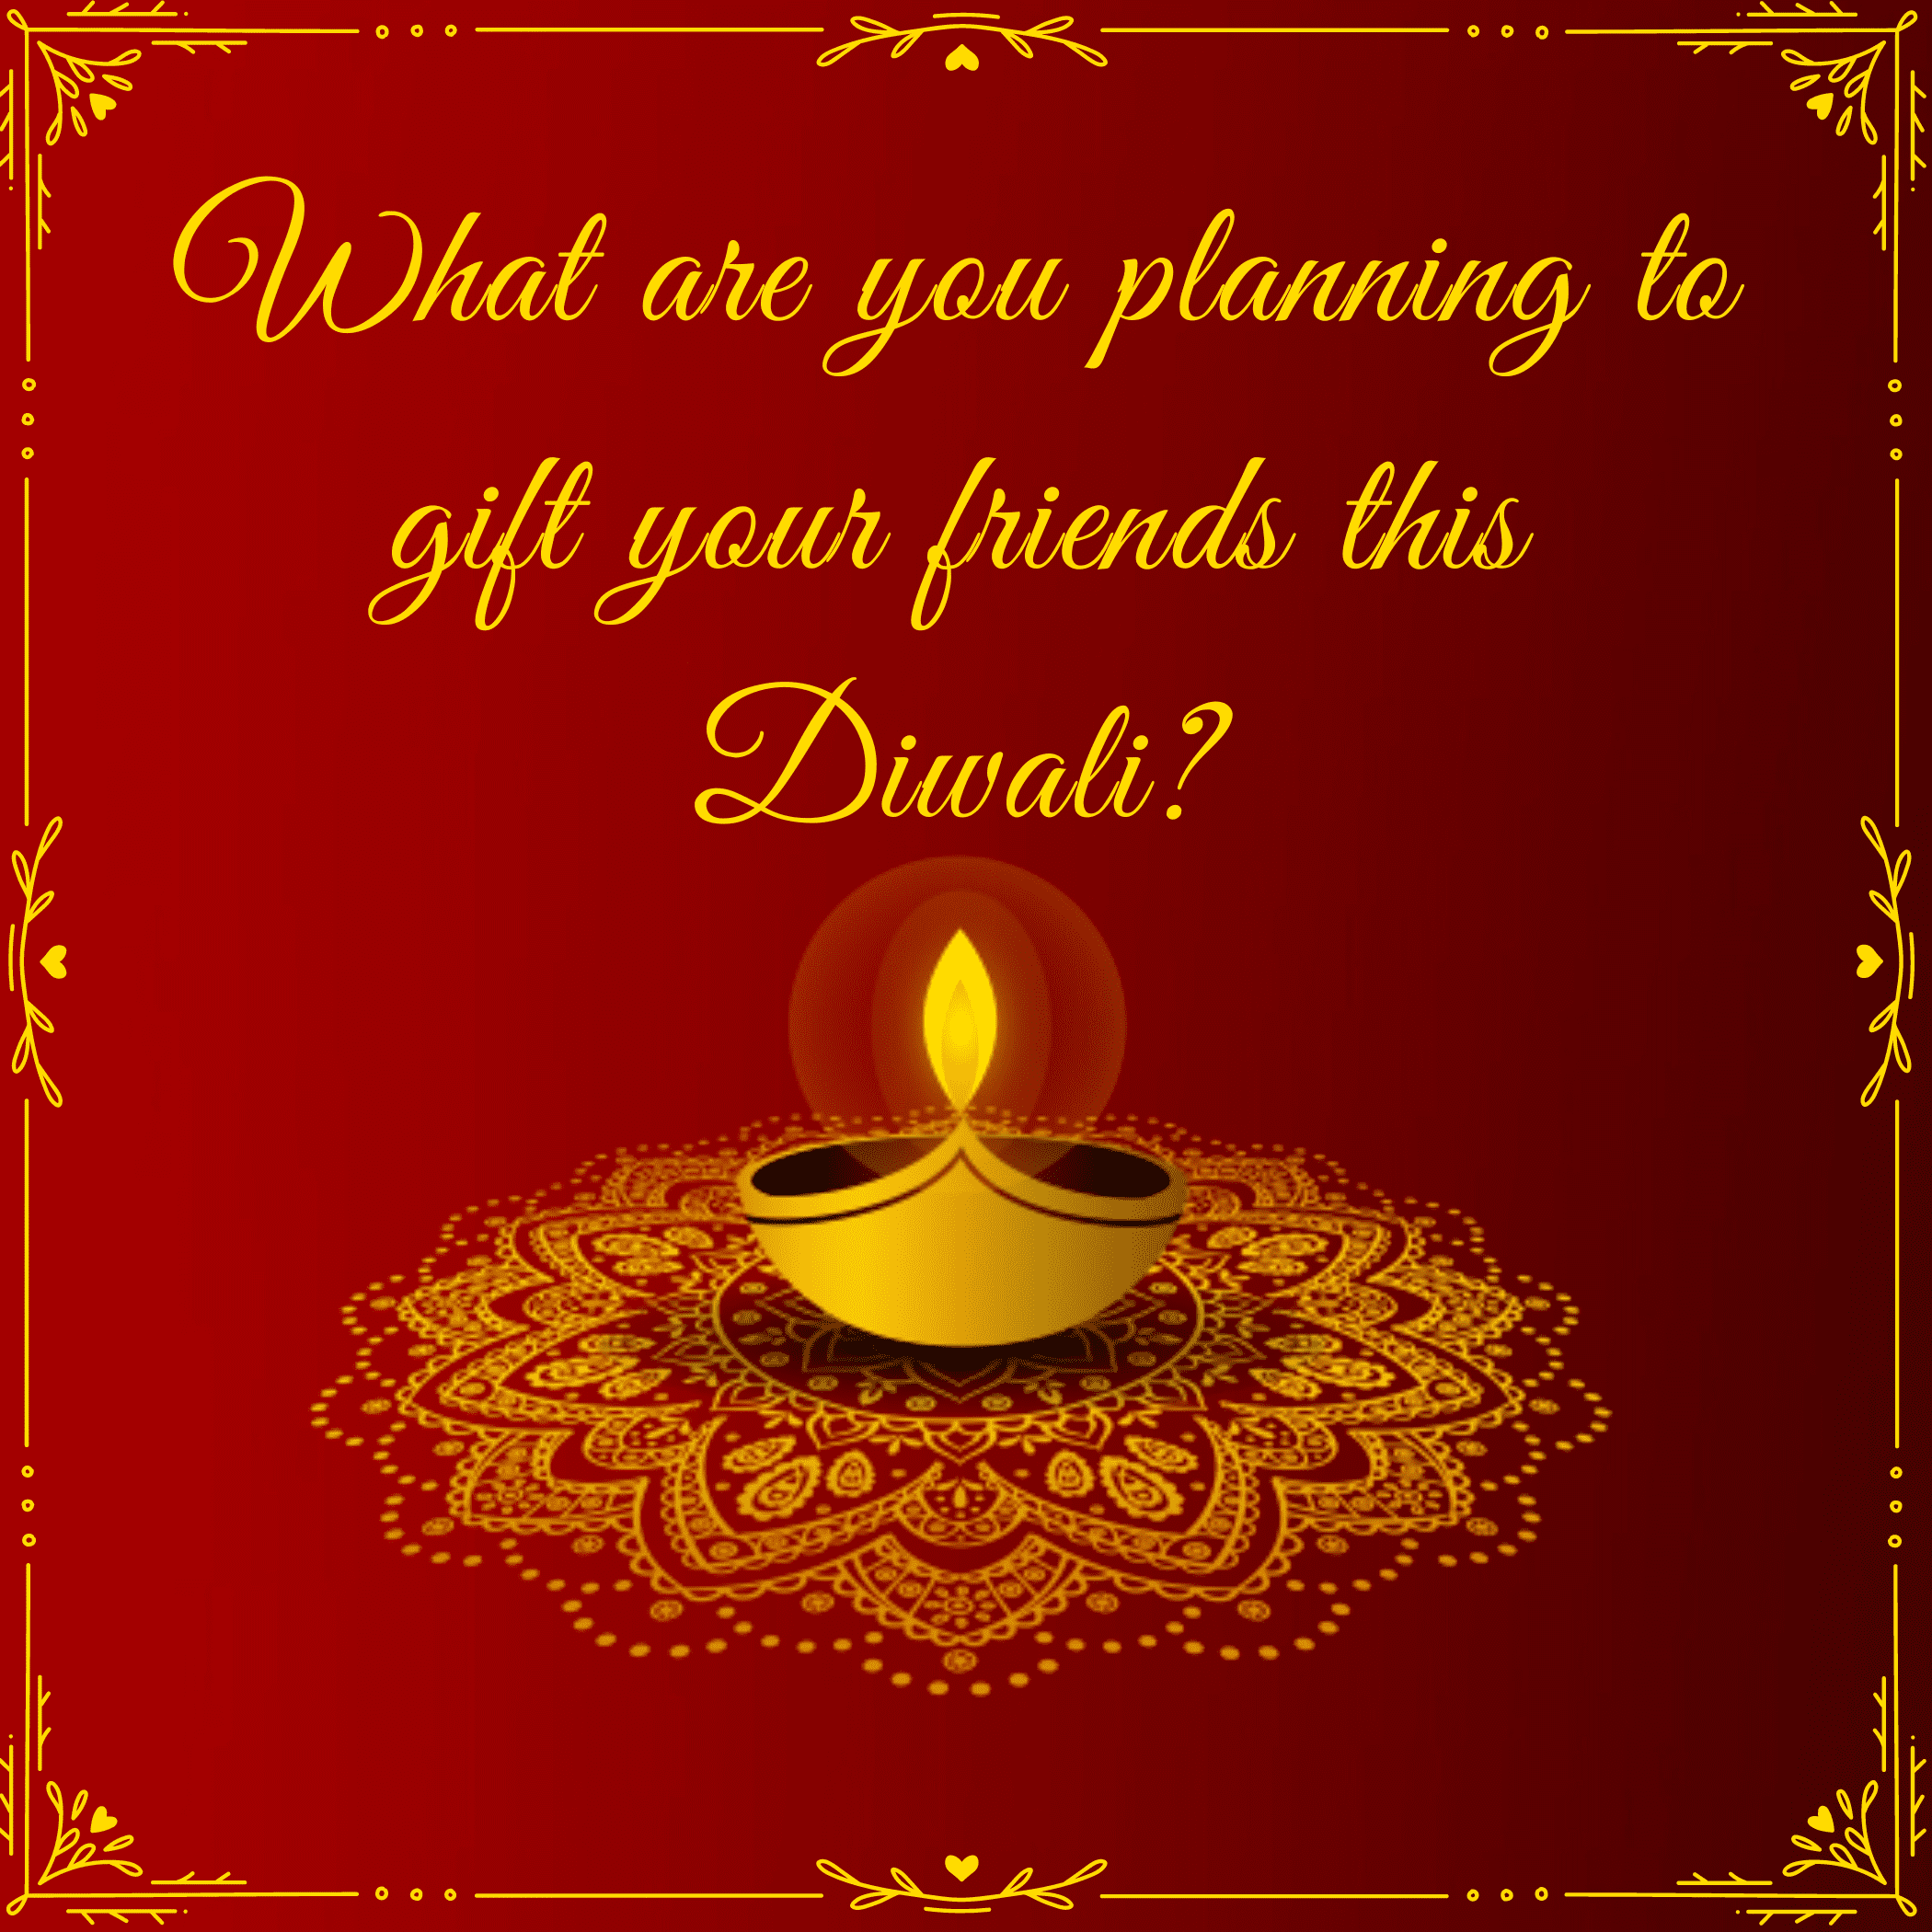 What are you planning to gift your friends this Diwali?